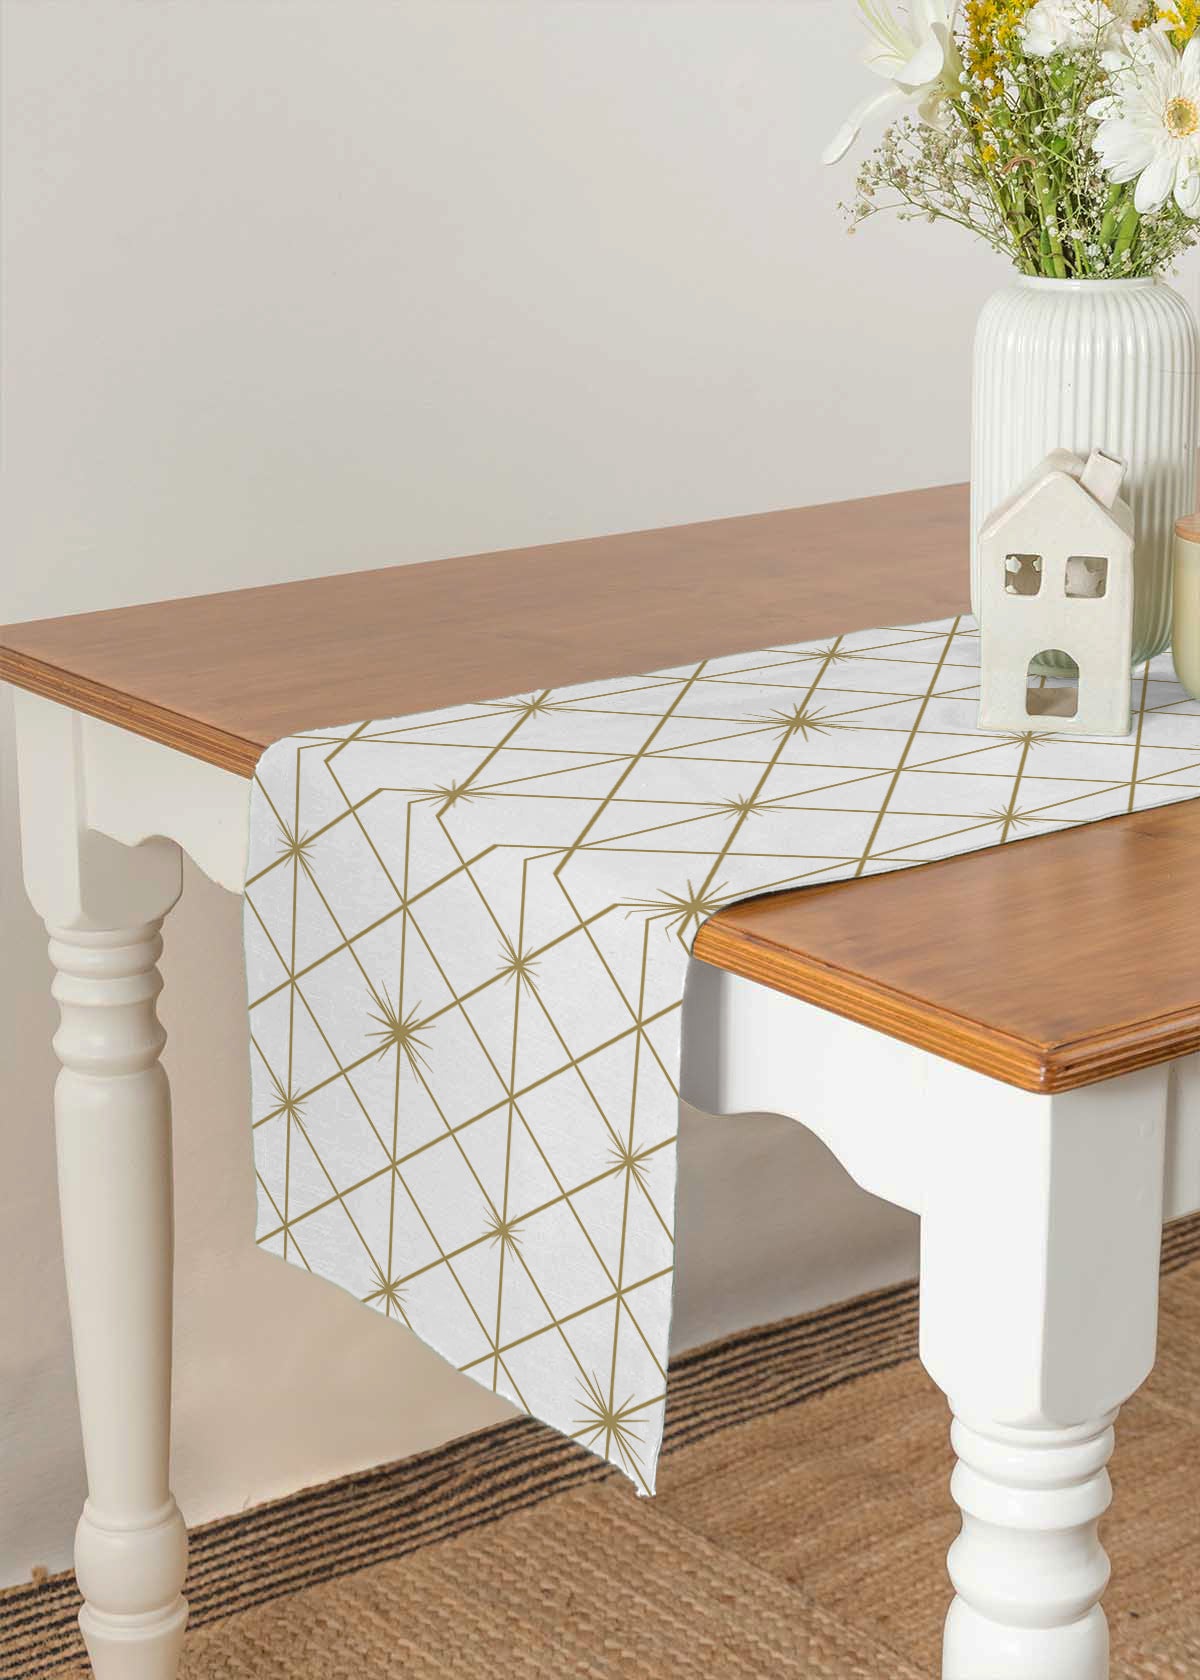 Stardust Printed Cotton Table Runner - Pale Gold